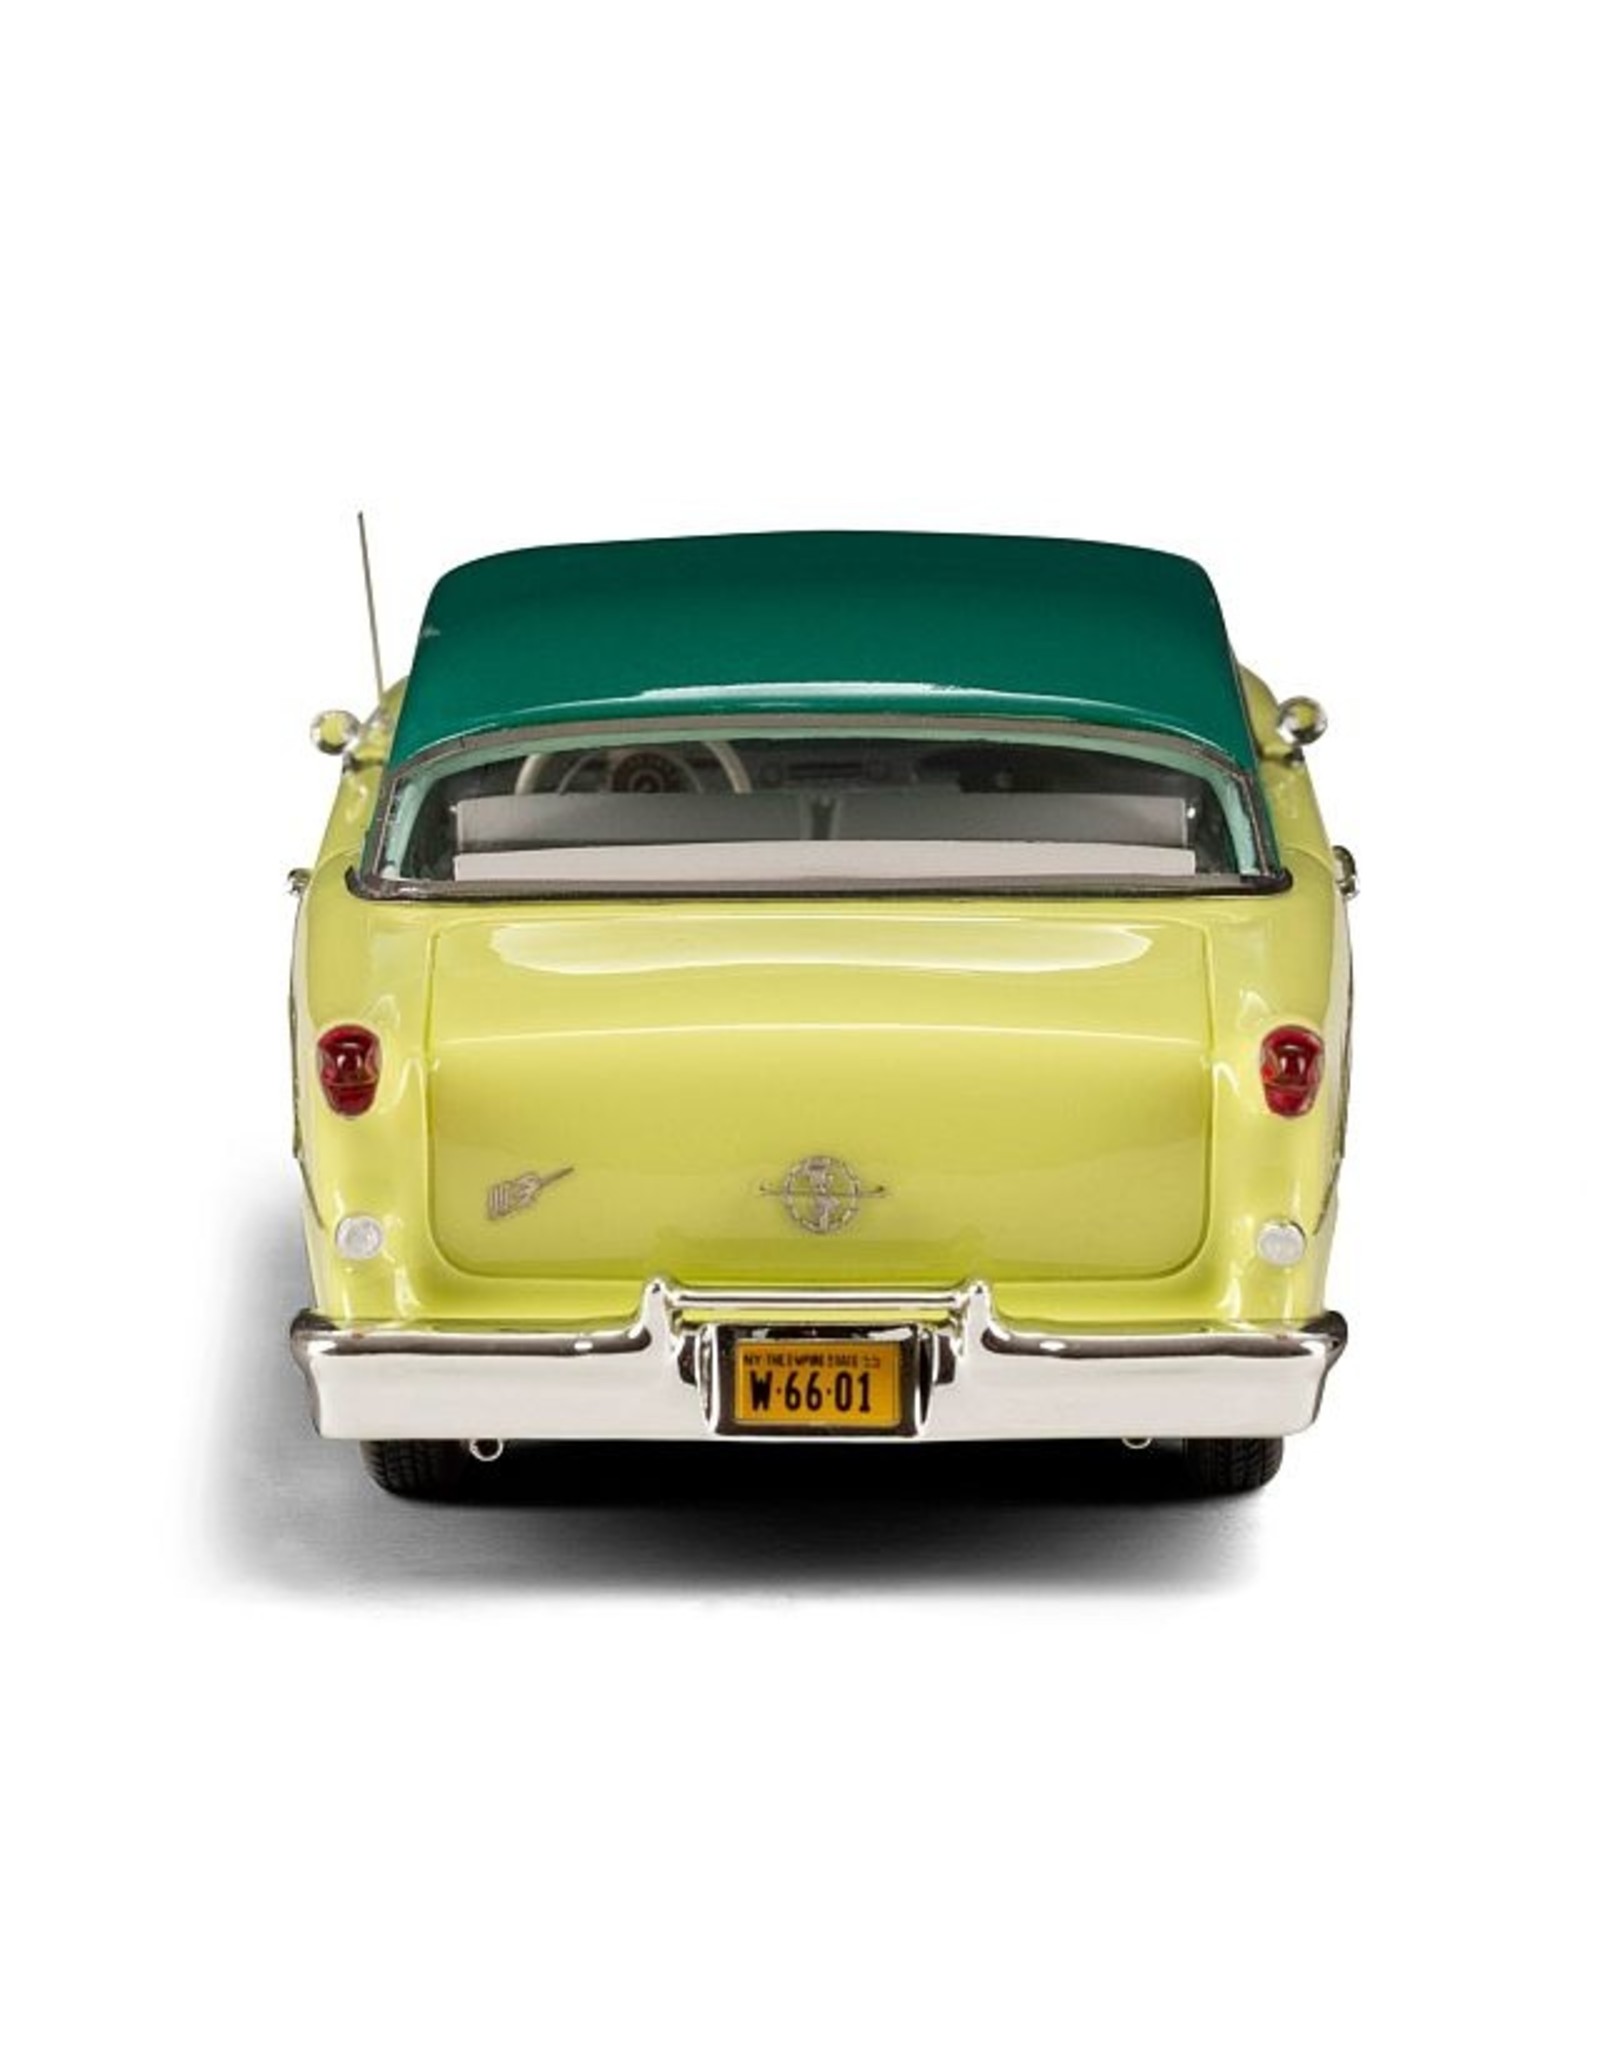 Oldsmobile OLDSMOBILE SUPER 88 HOLIDAY COUPE 1955(YELLOW/GREEN)